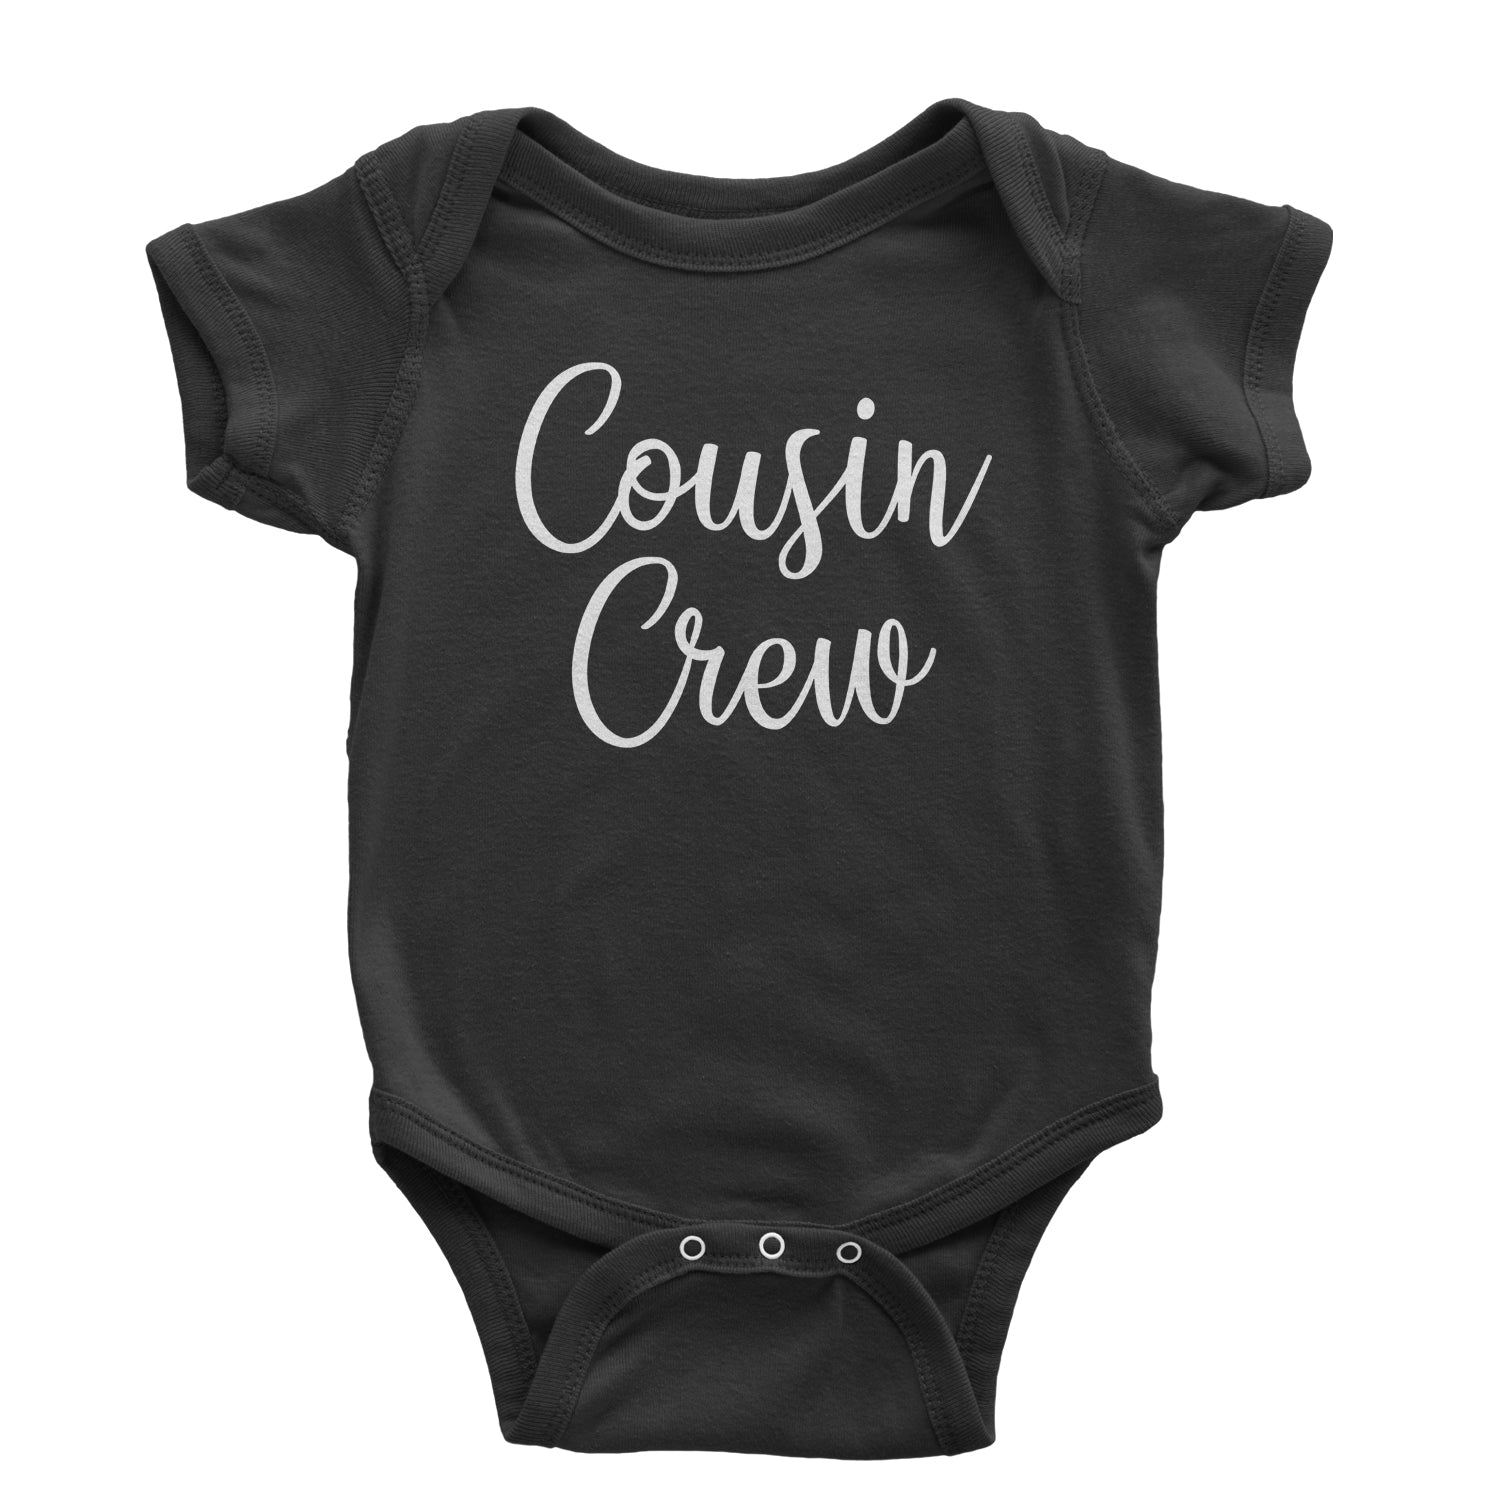 Cousin Crew Fun Family Outfit Infant One-Piece Romper Bodysuit and Toddler T-shirt barbecue, bbq, cook, family, out, reunion by Expression Tees